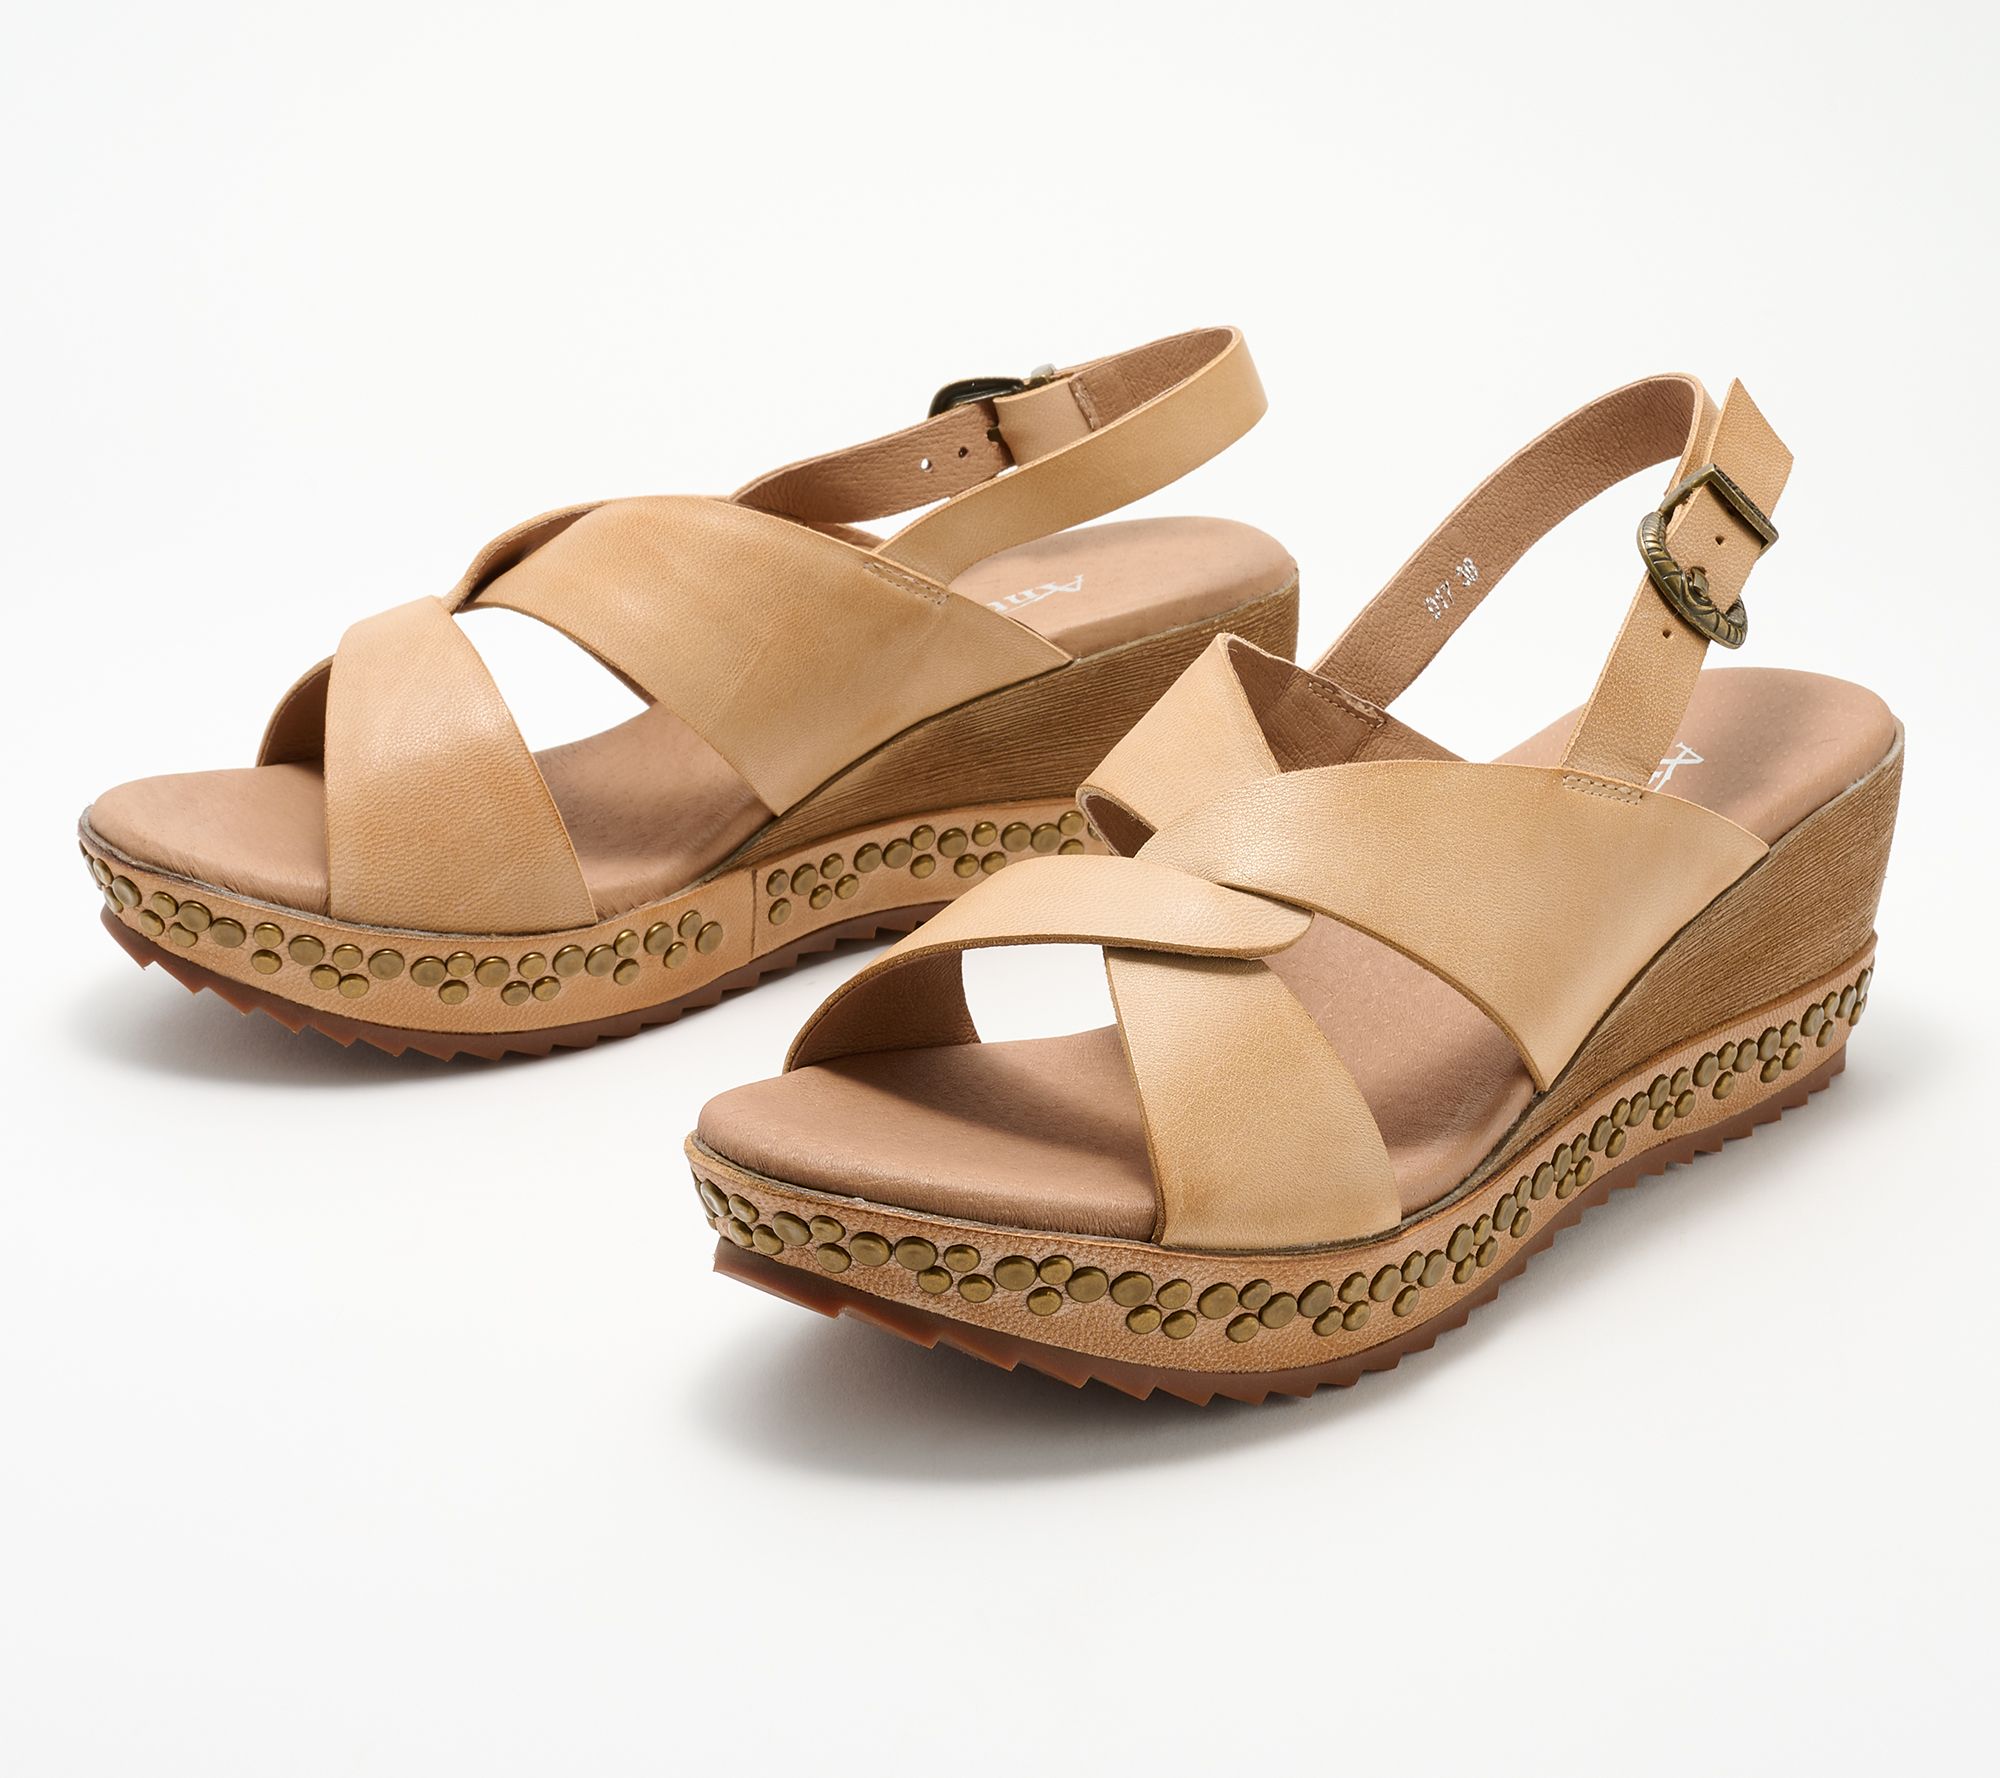 Antelope Leather Ankle Strap Wedge Sandals - Danessa - QVC.com